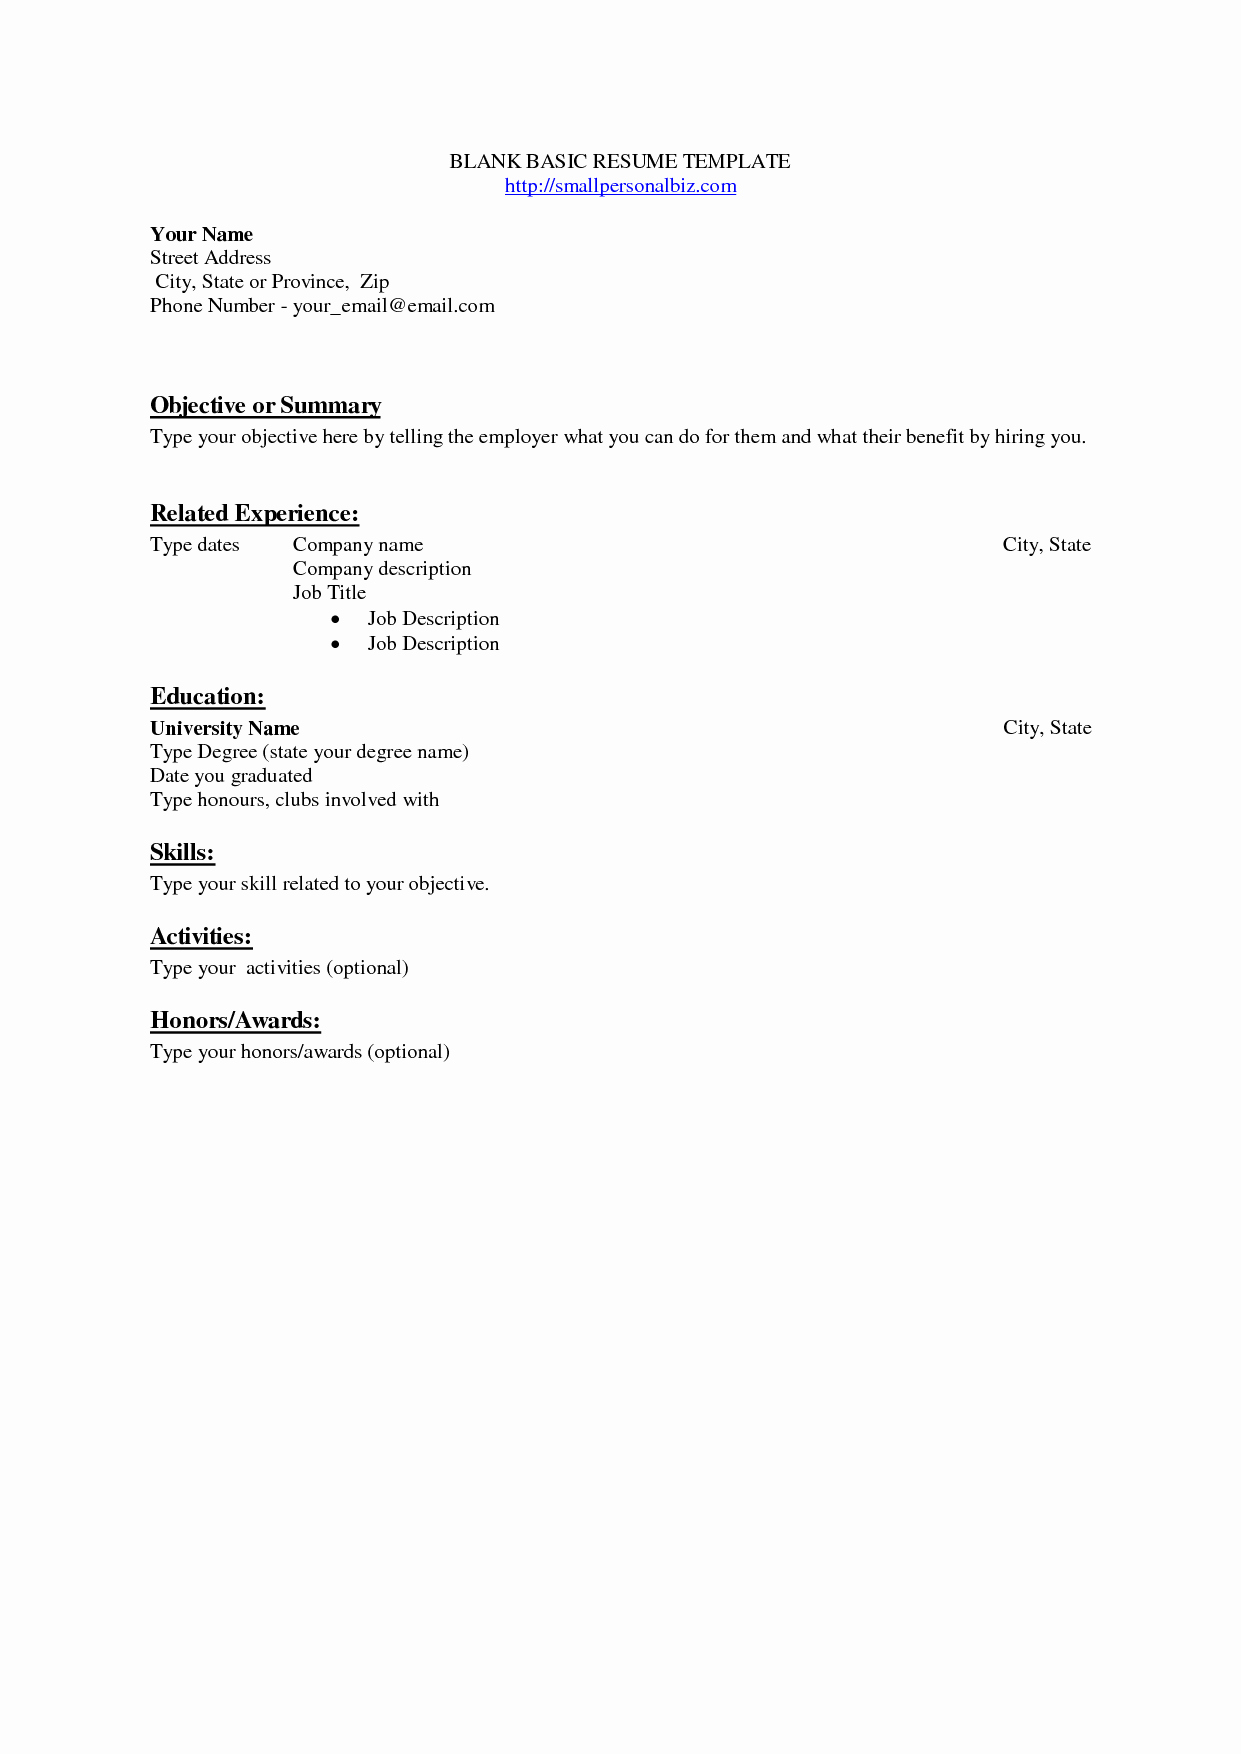 Best S Of Blank Resume Templates Fill In Blank